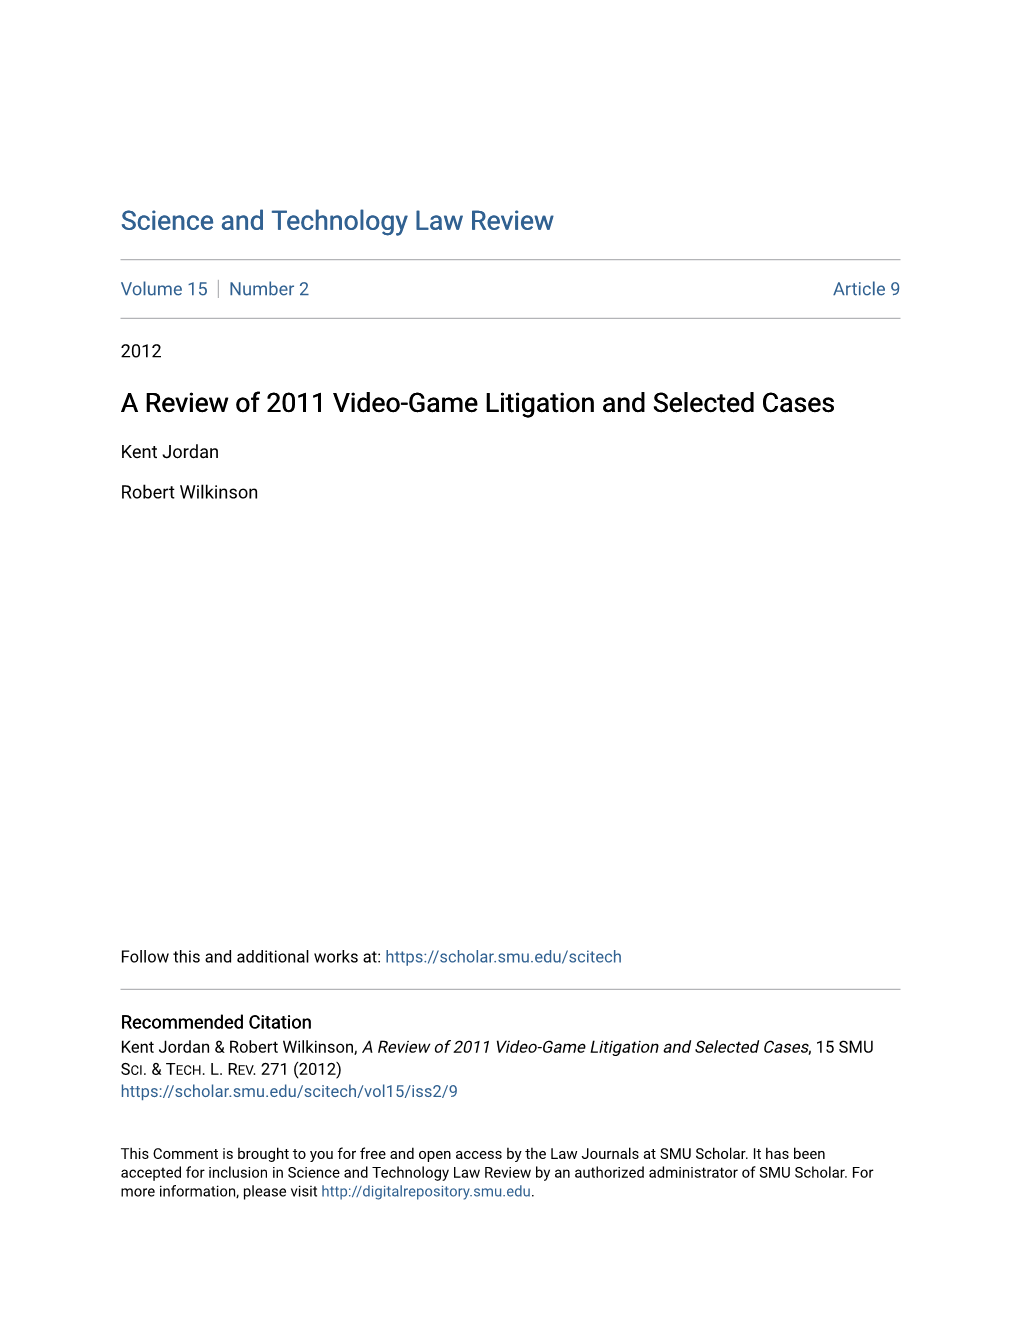 A Review of 2011 Video-Game Litigation and Selected Cases